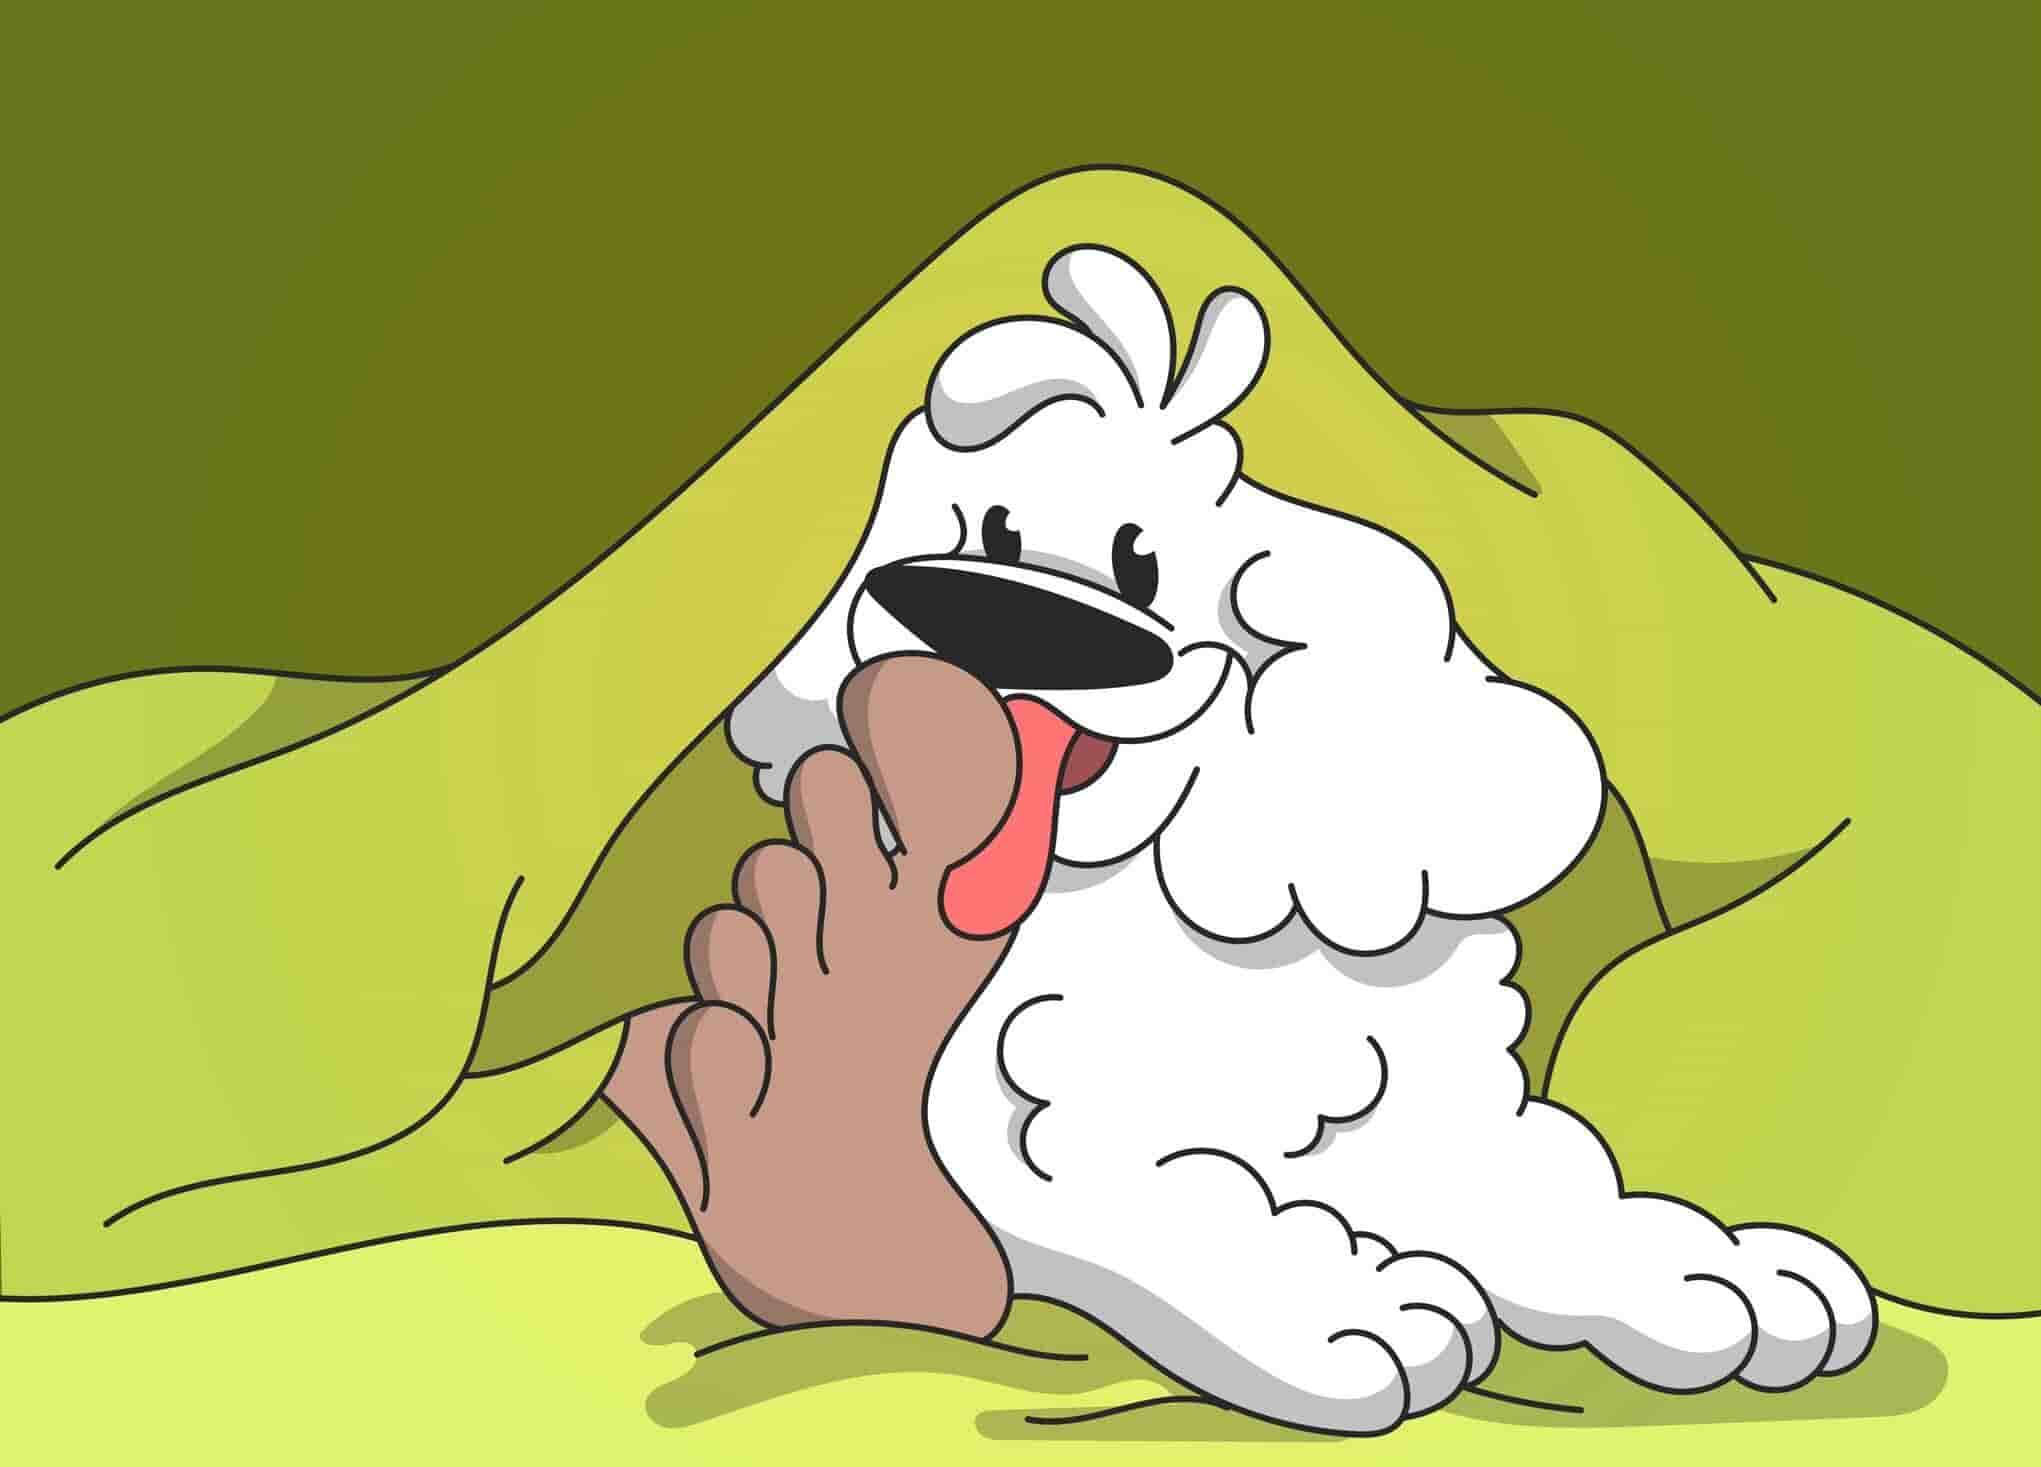 Why Do Dogs Lick Feet?